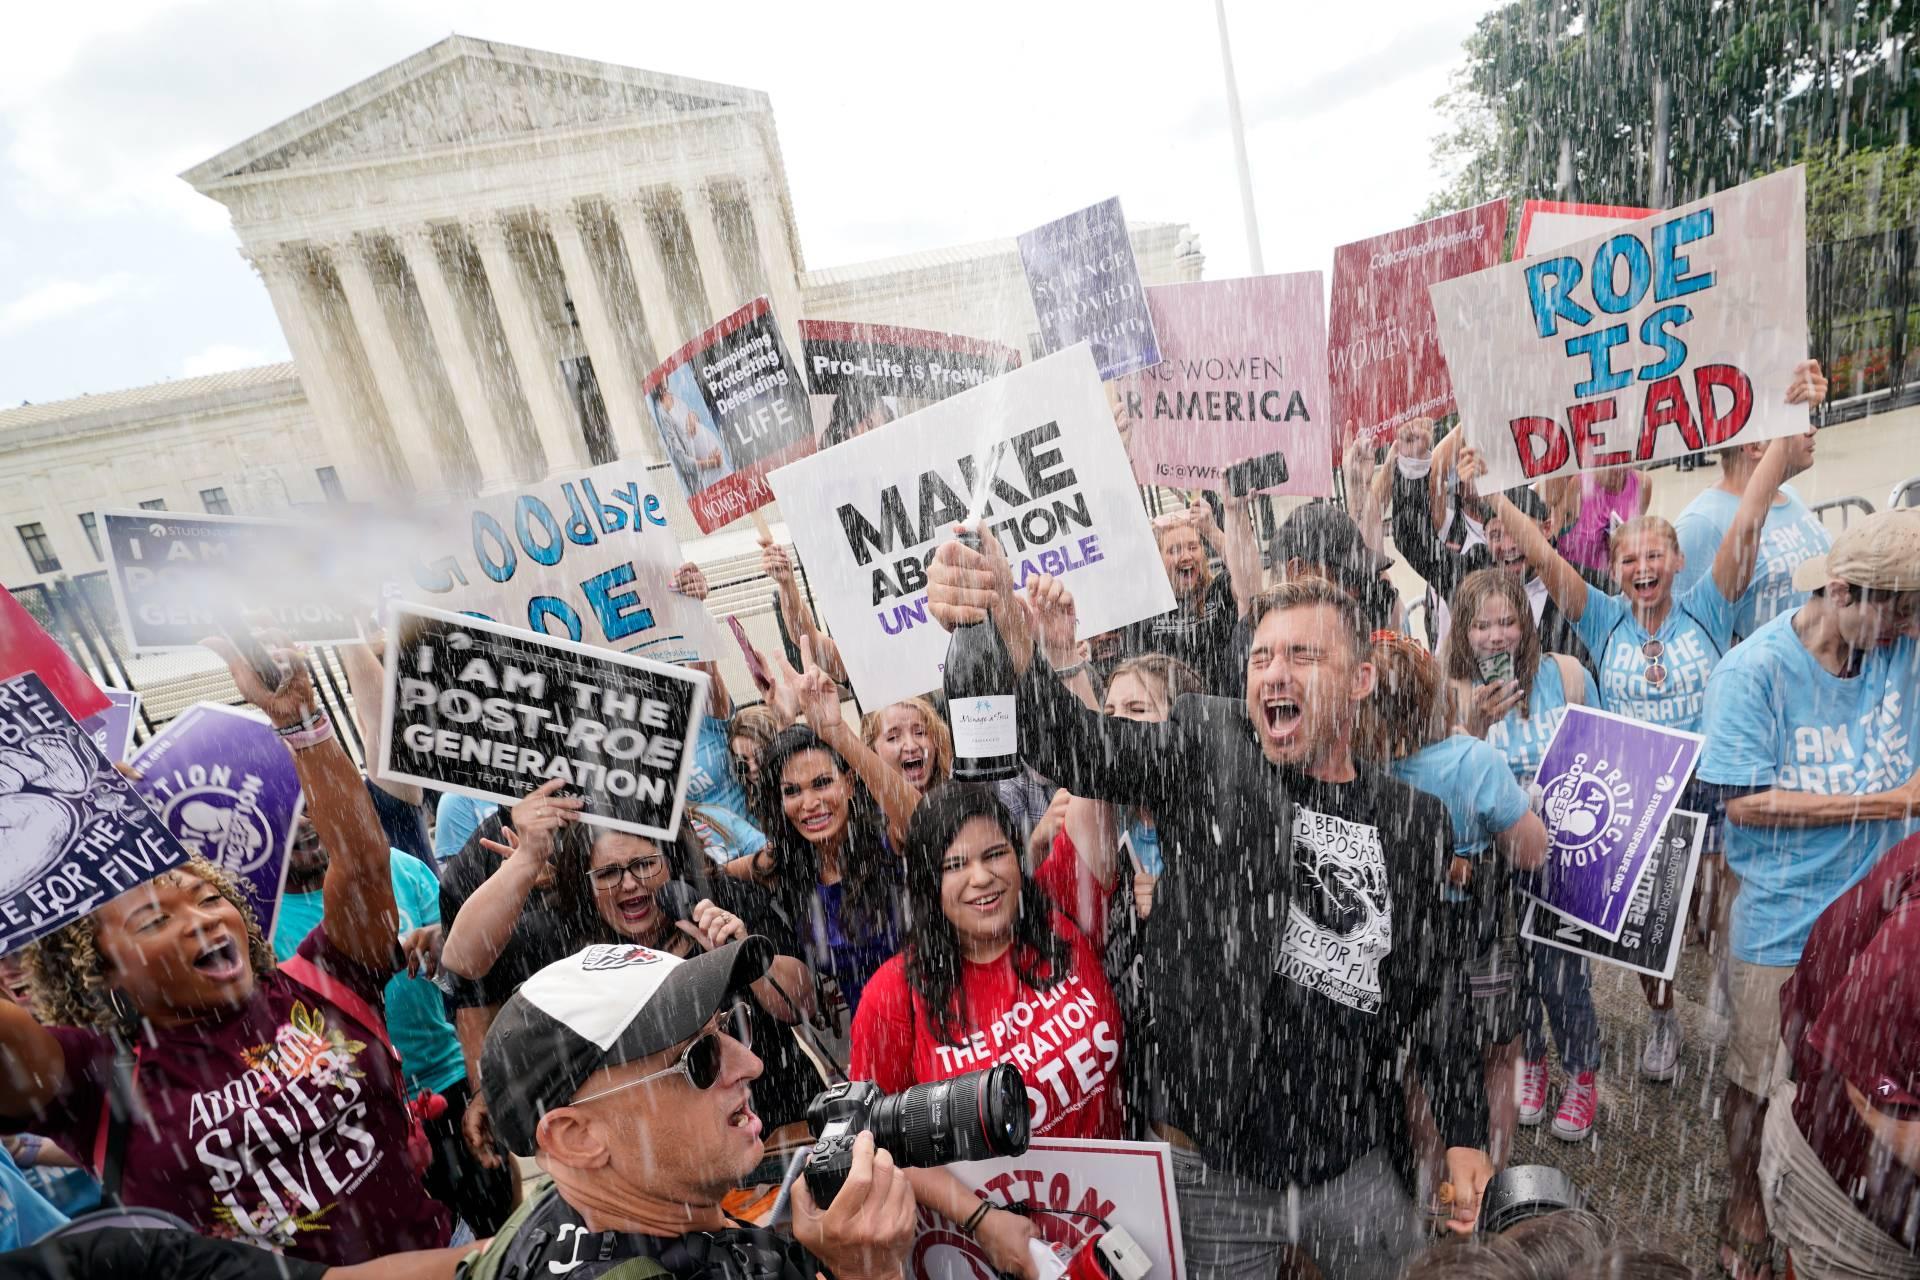 A celebration outside the Supreme Court, Friday, June 24, 2022, in Washington. The Supreme Court has ended constitutional protections for abortion that had been in place nearly 50 years — a decision by its conservative majority to overturn the court's landmark abortion cases. (AP Photo / Steve Helber)